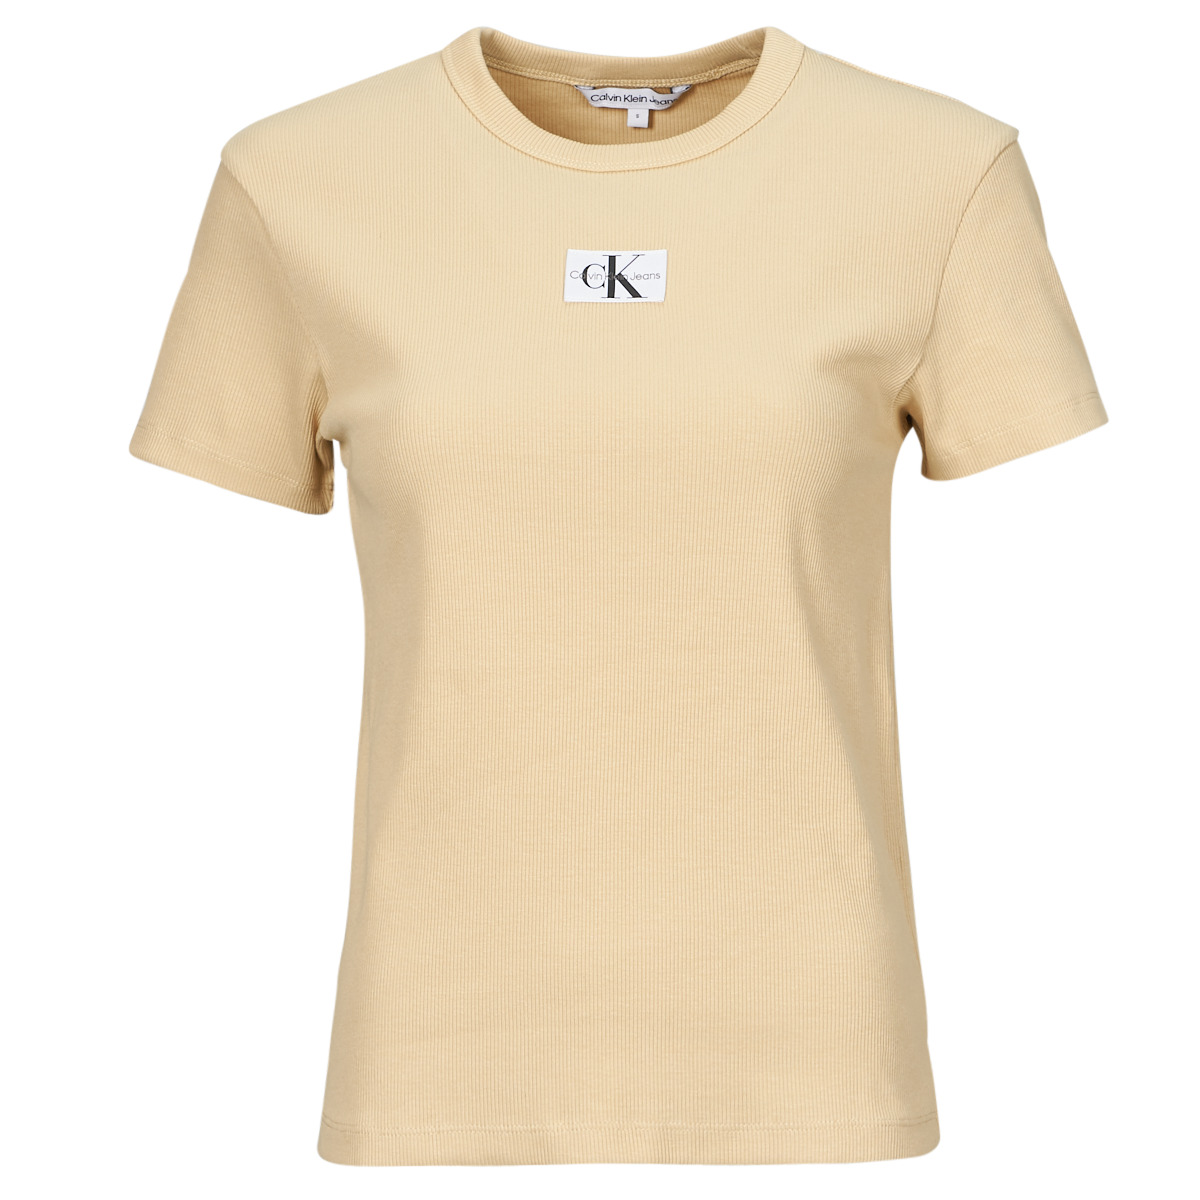 Calvin Klein Jeans WOVEN | 44,00 - Clothing short-sleeved Beige REGULAR € Spartoo RIB Europe ! TEE - LABEL Fast Women t-shirts delivery